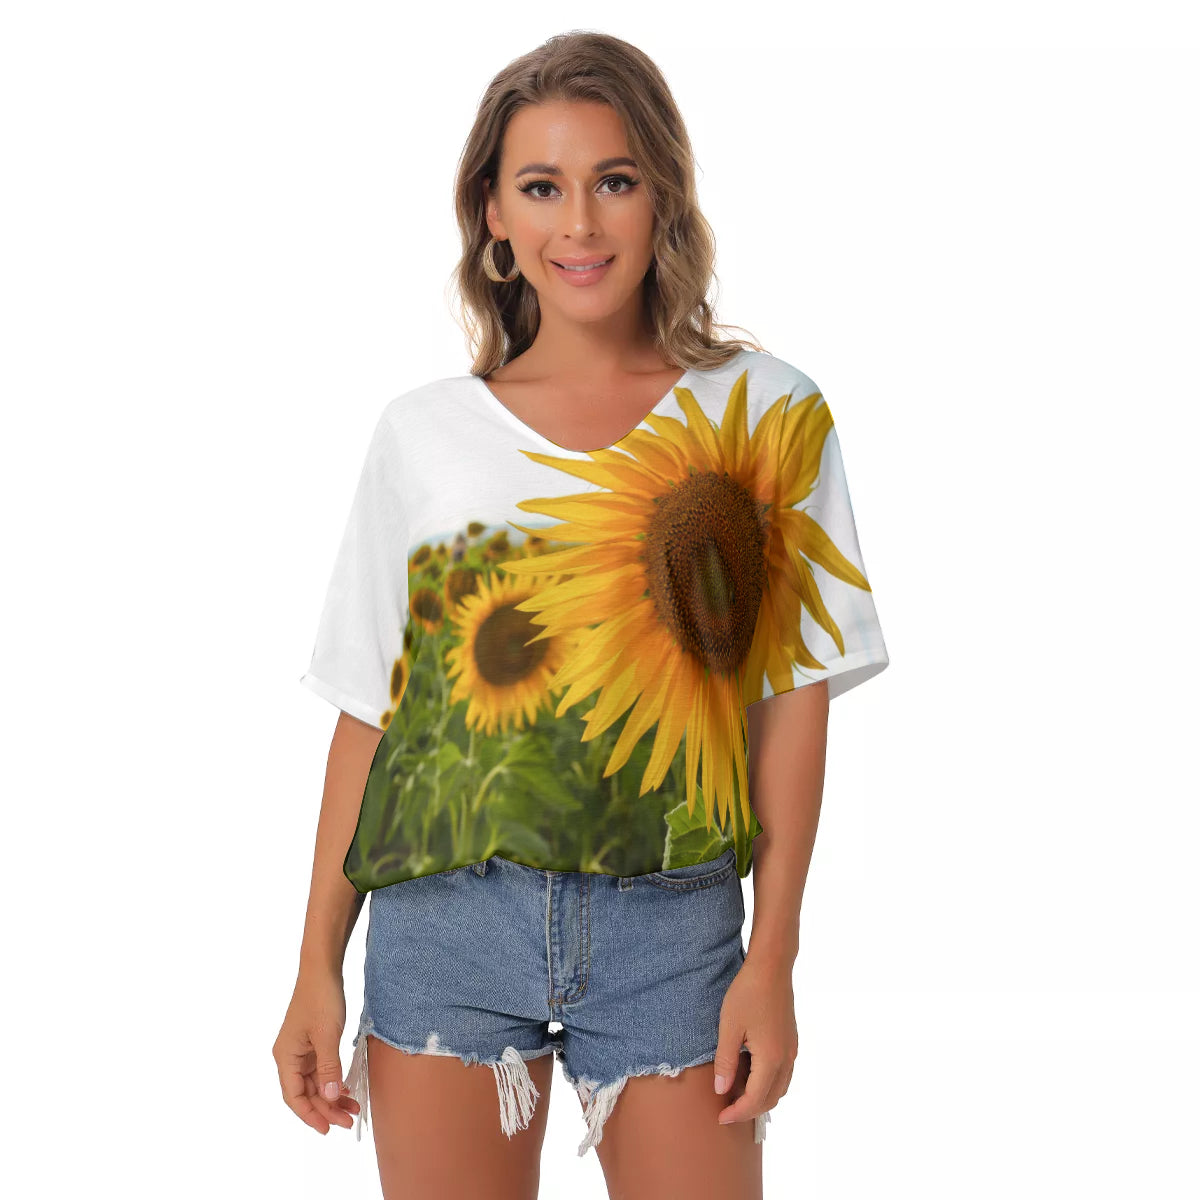 Sunflowers Women's Bat Sleeves V-Neck Top up to 2 XL